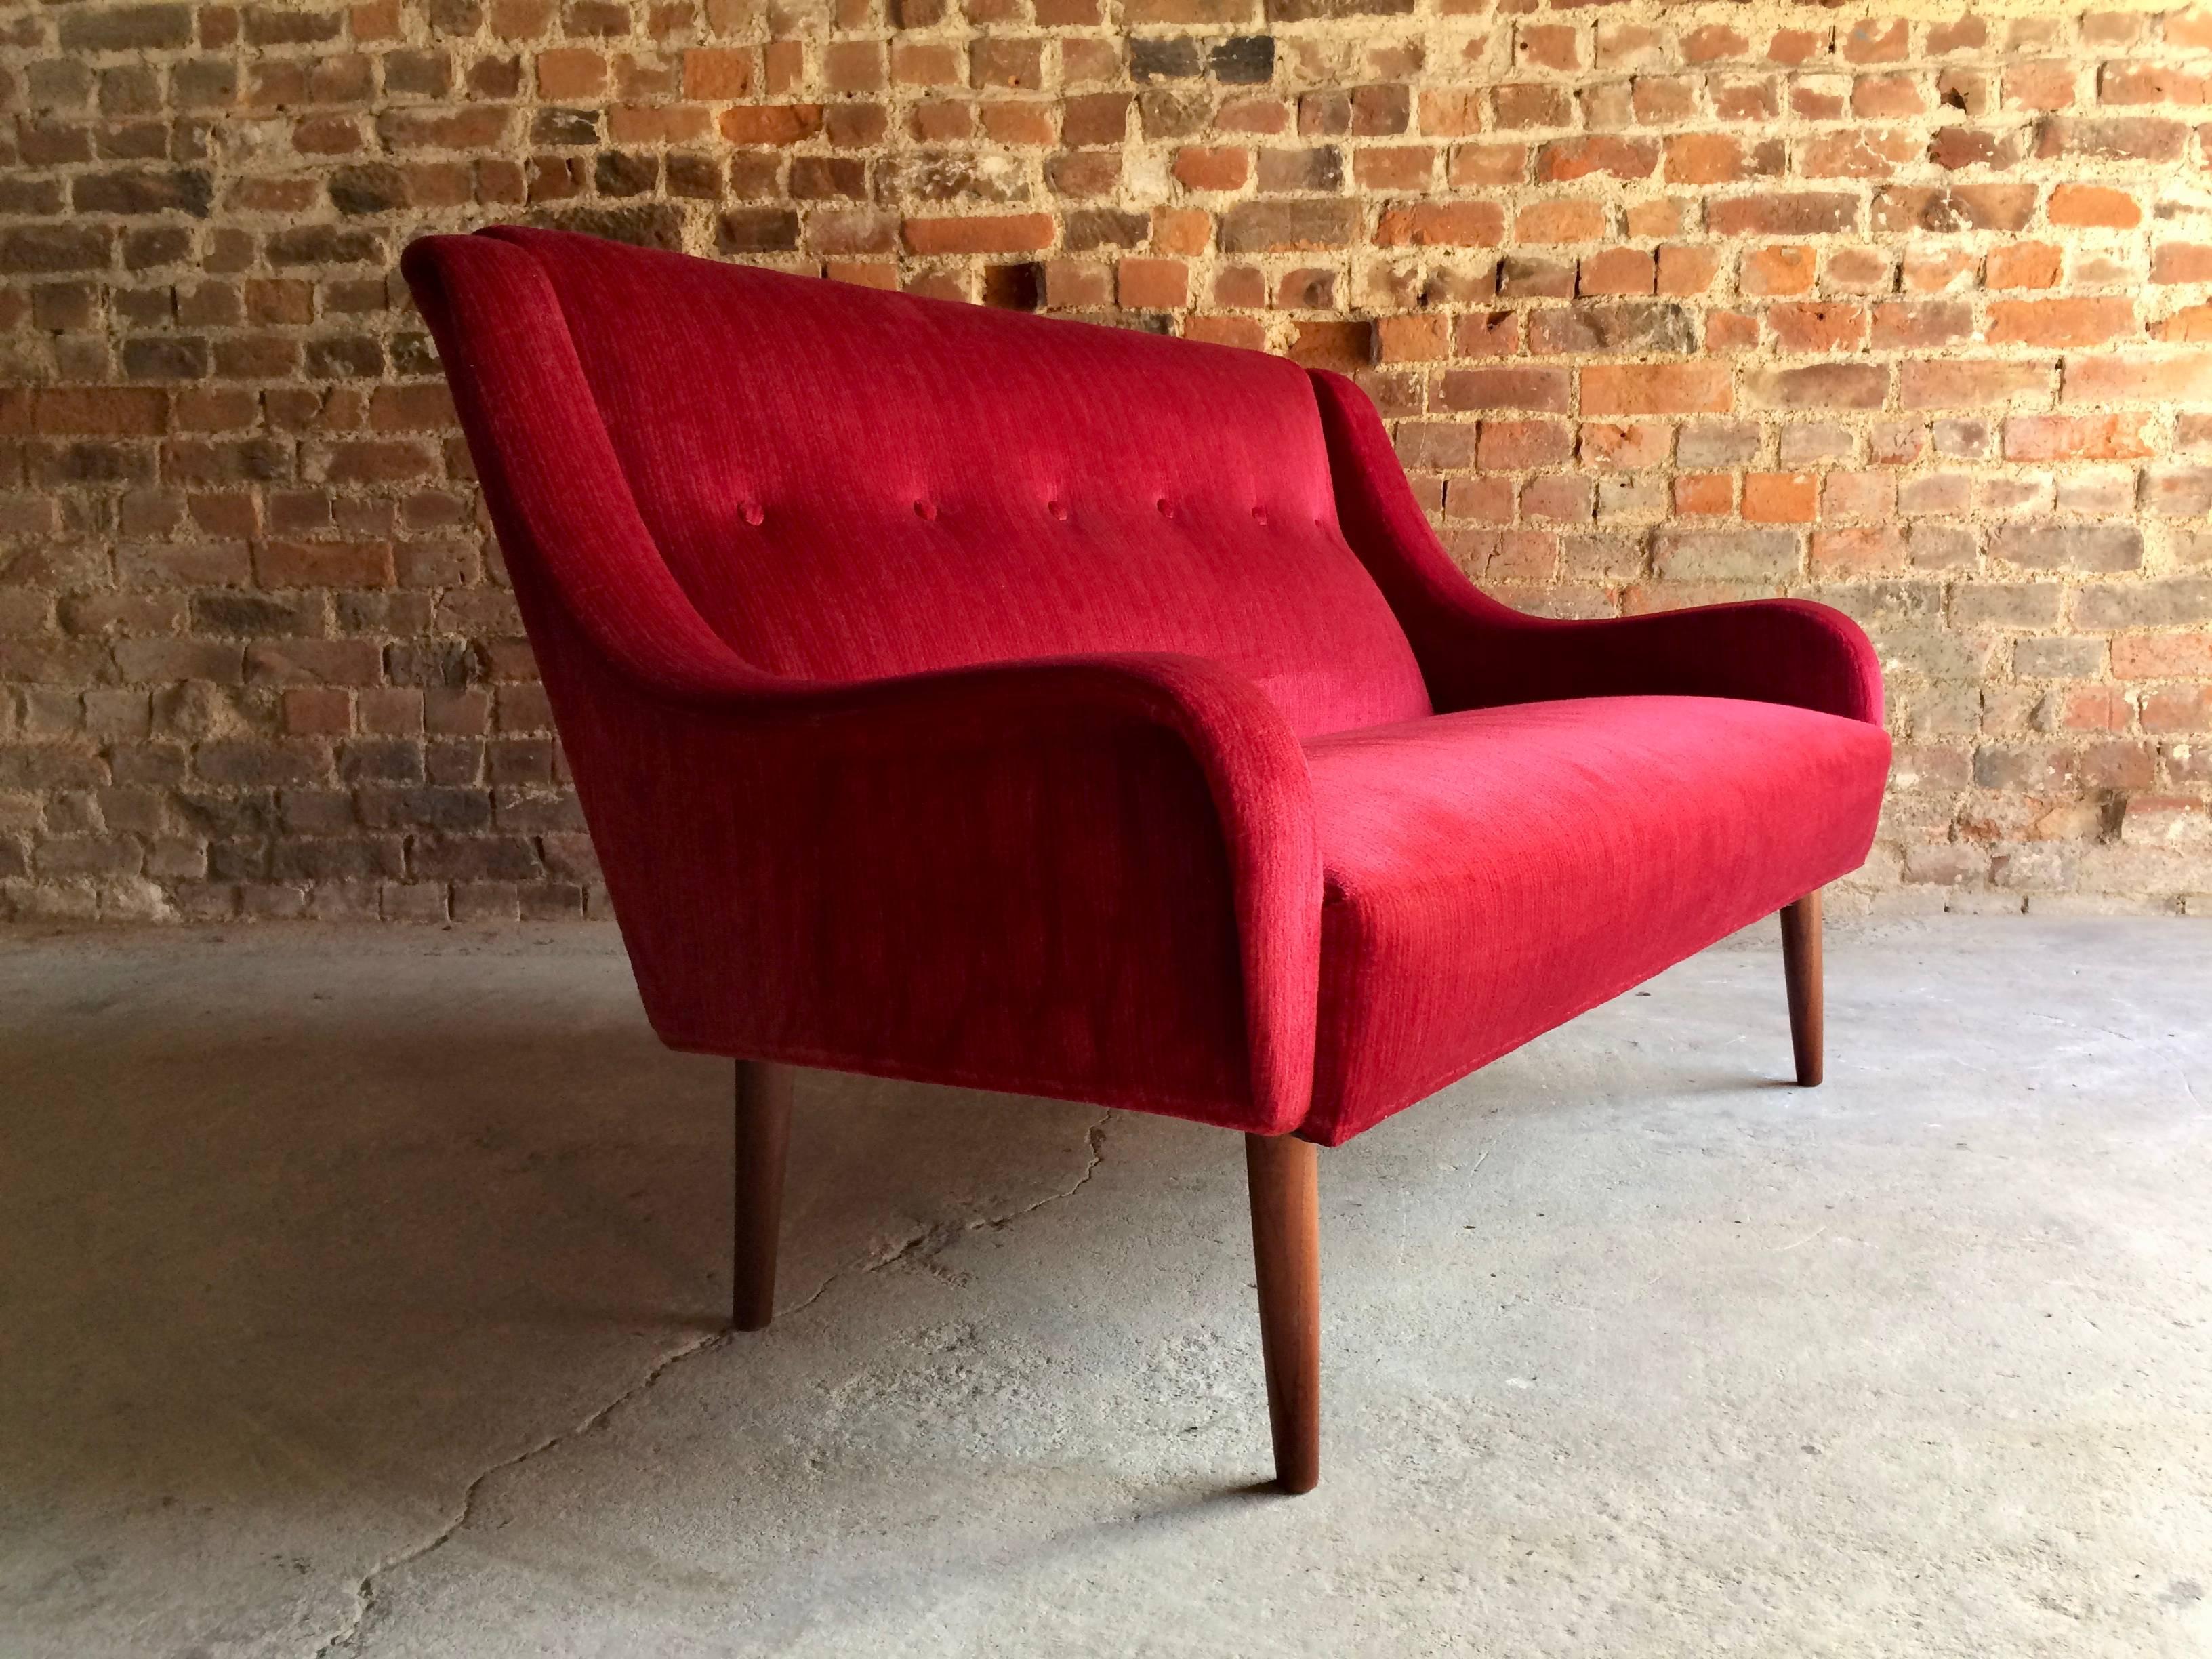 A beautifully stylish Mid-Century Danish design red velour-type two-seat sofa on teak tapering legs circa 1950s, legs with some minor marks and wear, some very minor discolouration in places, no rips or tears, all buttons present, overall a very